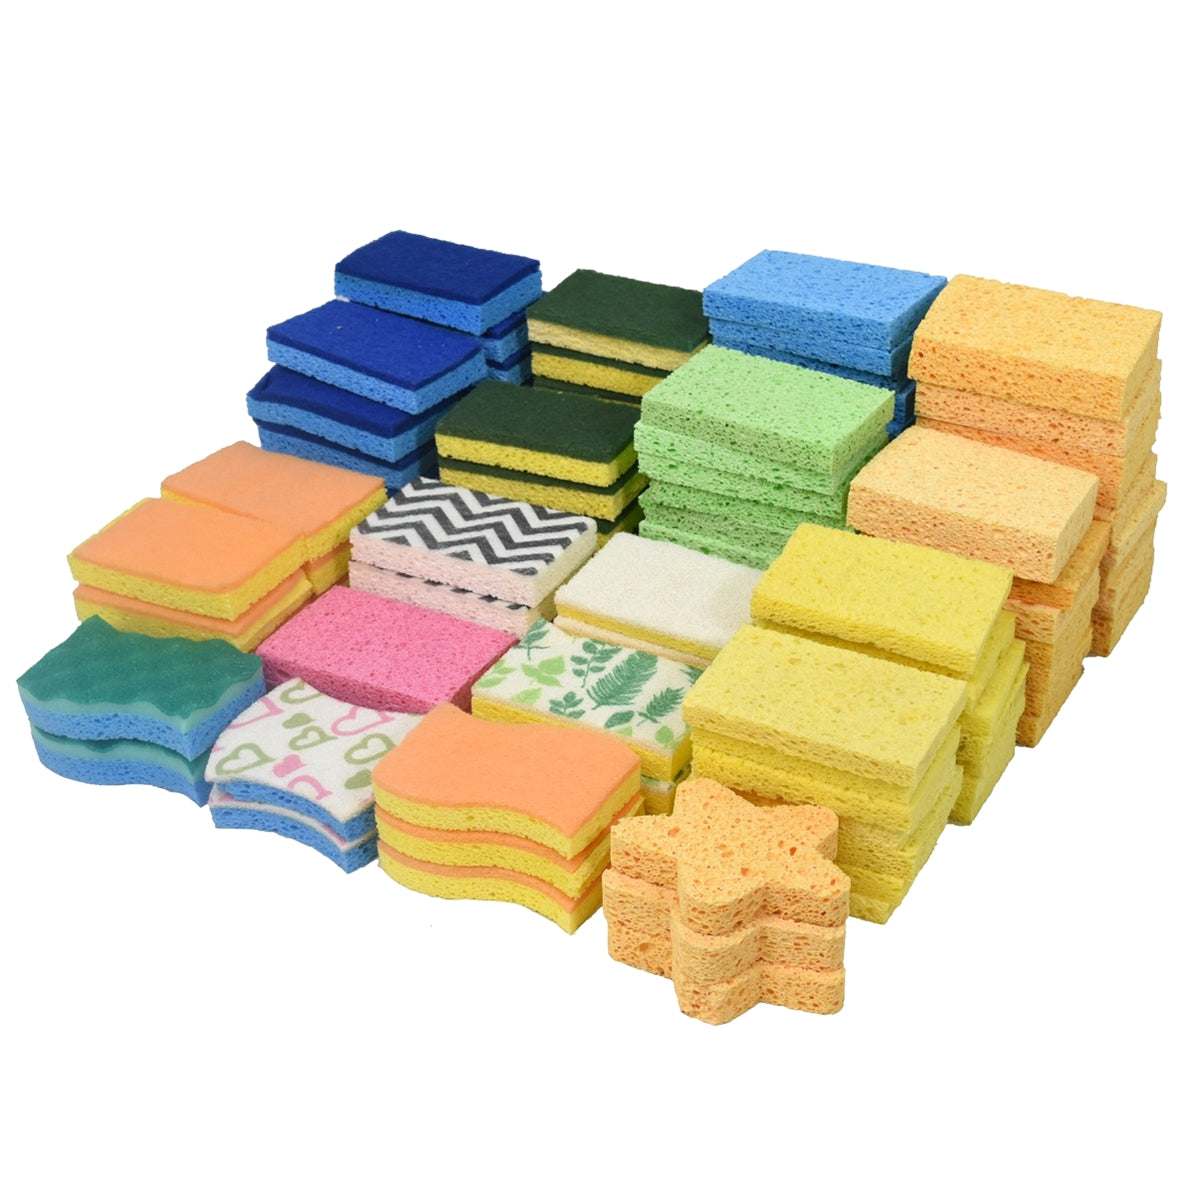 EVERCLEAN Eco Friendly Natural Cellulose Cleaning Sponges, Bulk 